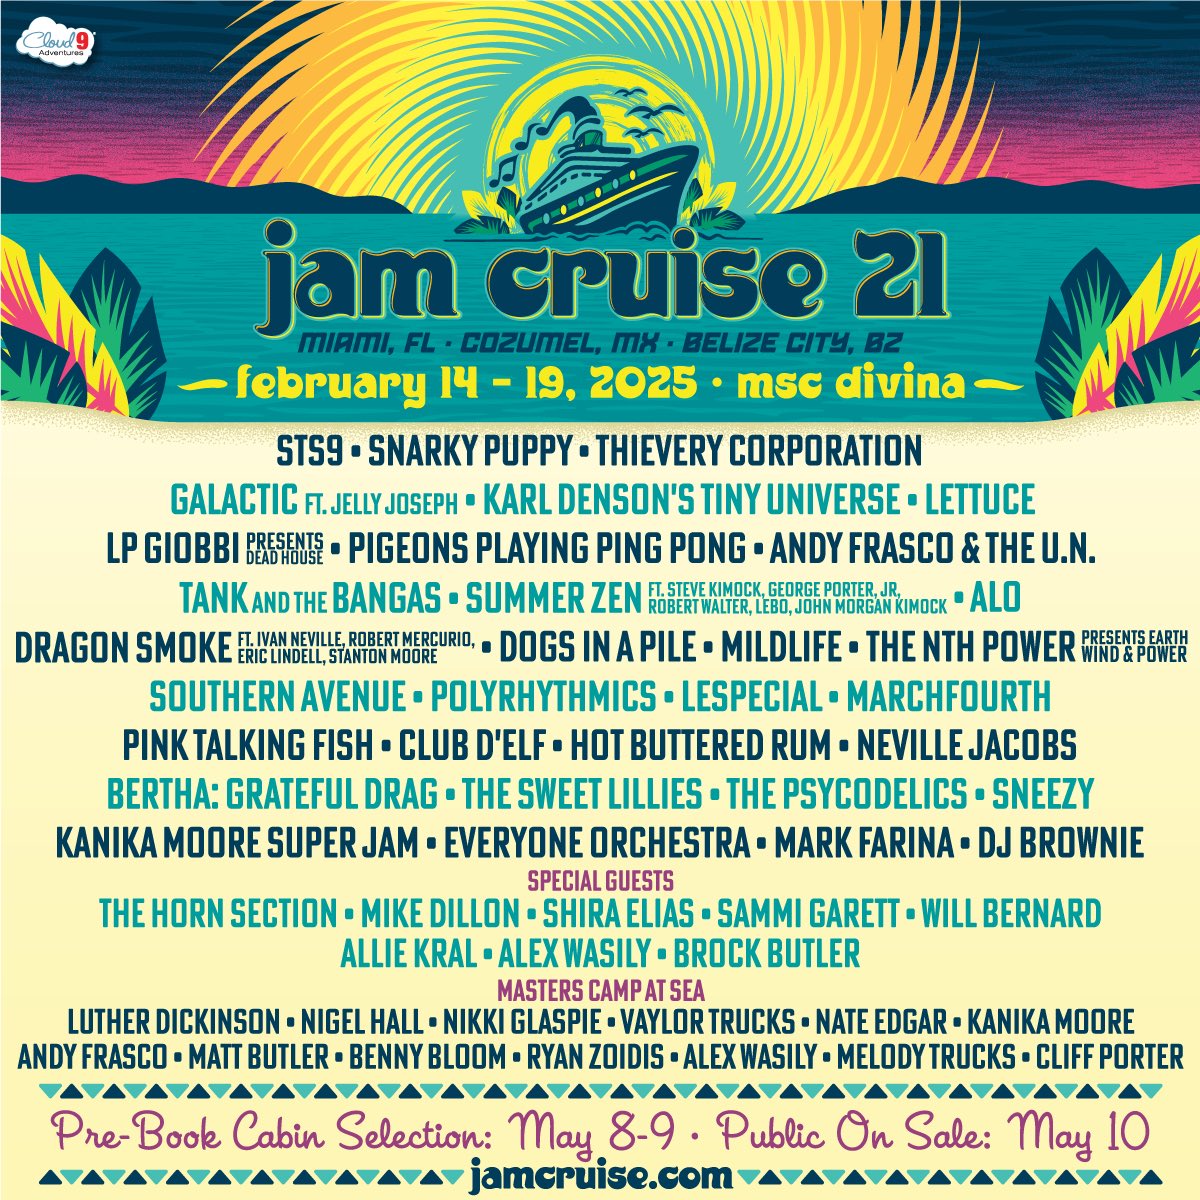 All Aboard 🛳️ @jamcruise 21 🌊 February 14-19, 2025 ✨ jamcruise.com Miami, FL > Cozumel, MX > Belize City, BZ > Pre-book Cabin Selection May 8-9 > Public On Sale May 10 @ 1:00pm ET